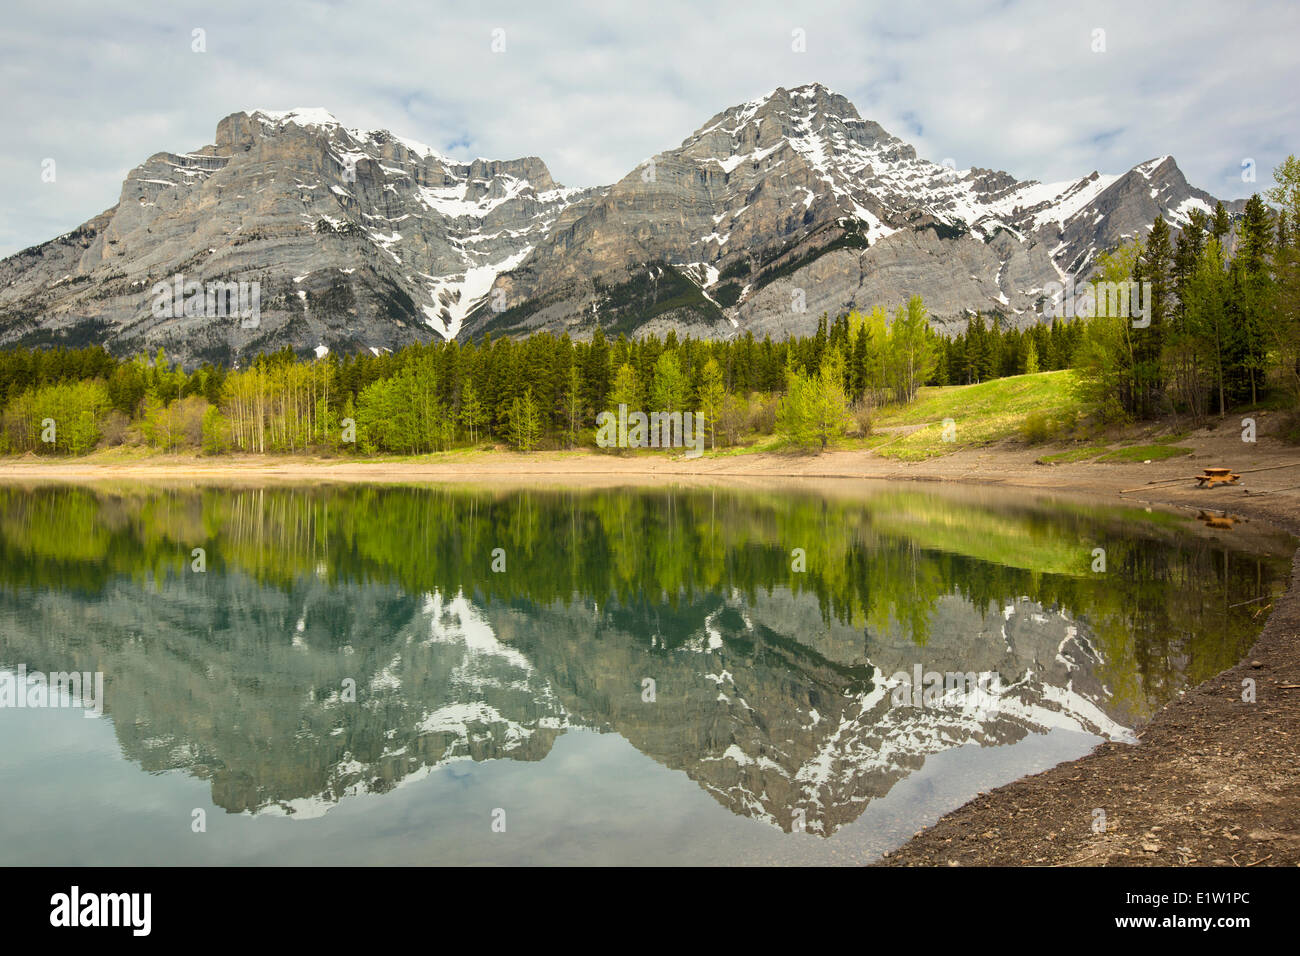 Mountains reflected in Wedge Pond, Kananaskis Provincial Park, Alberta, Canada Stock Photo